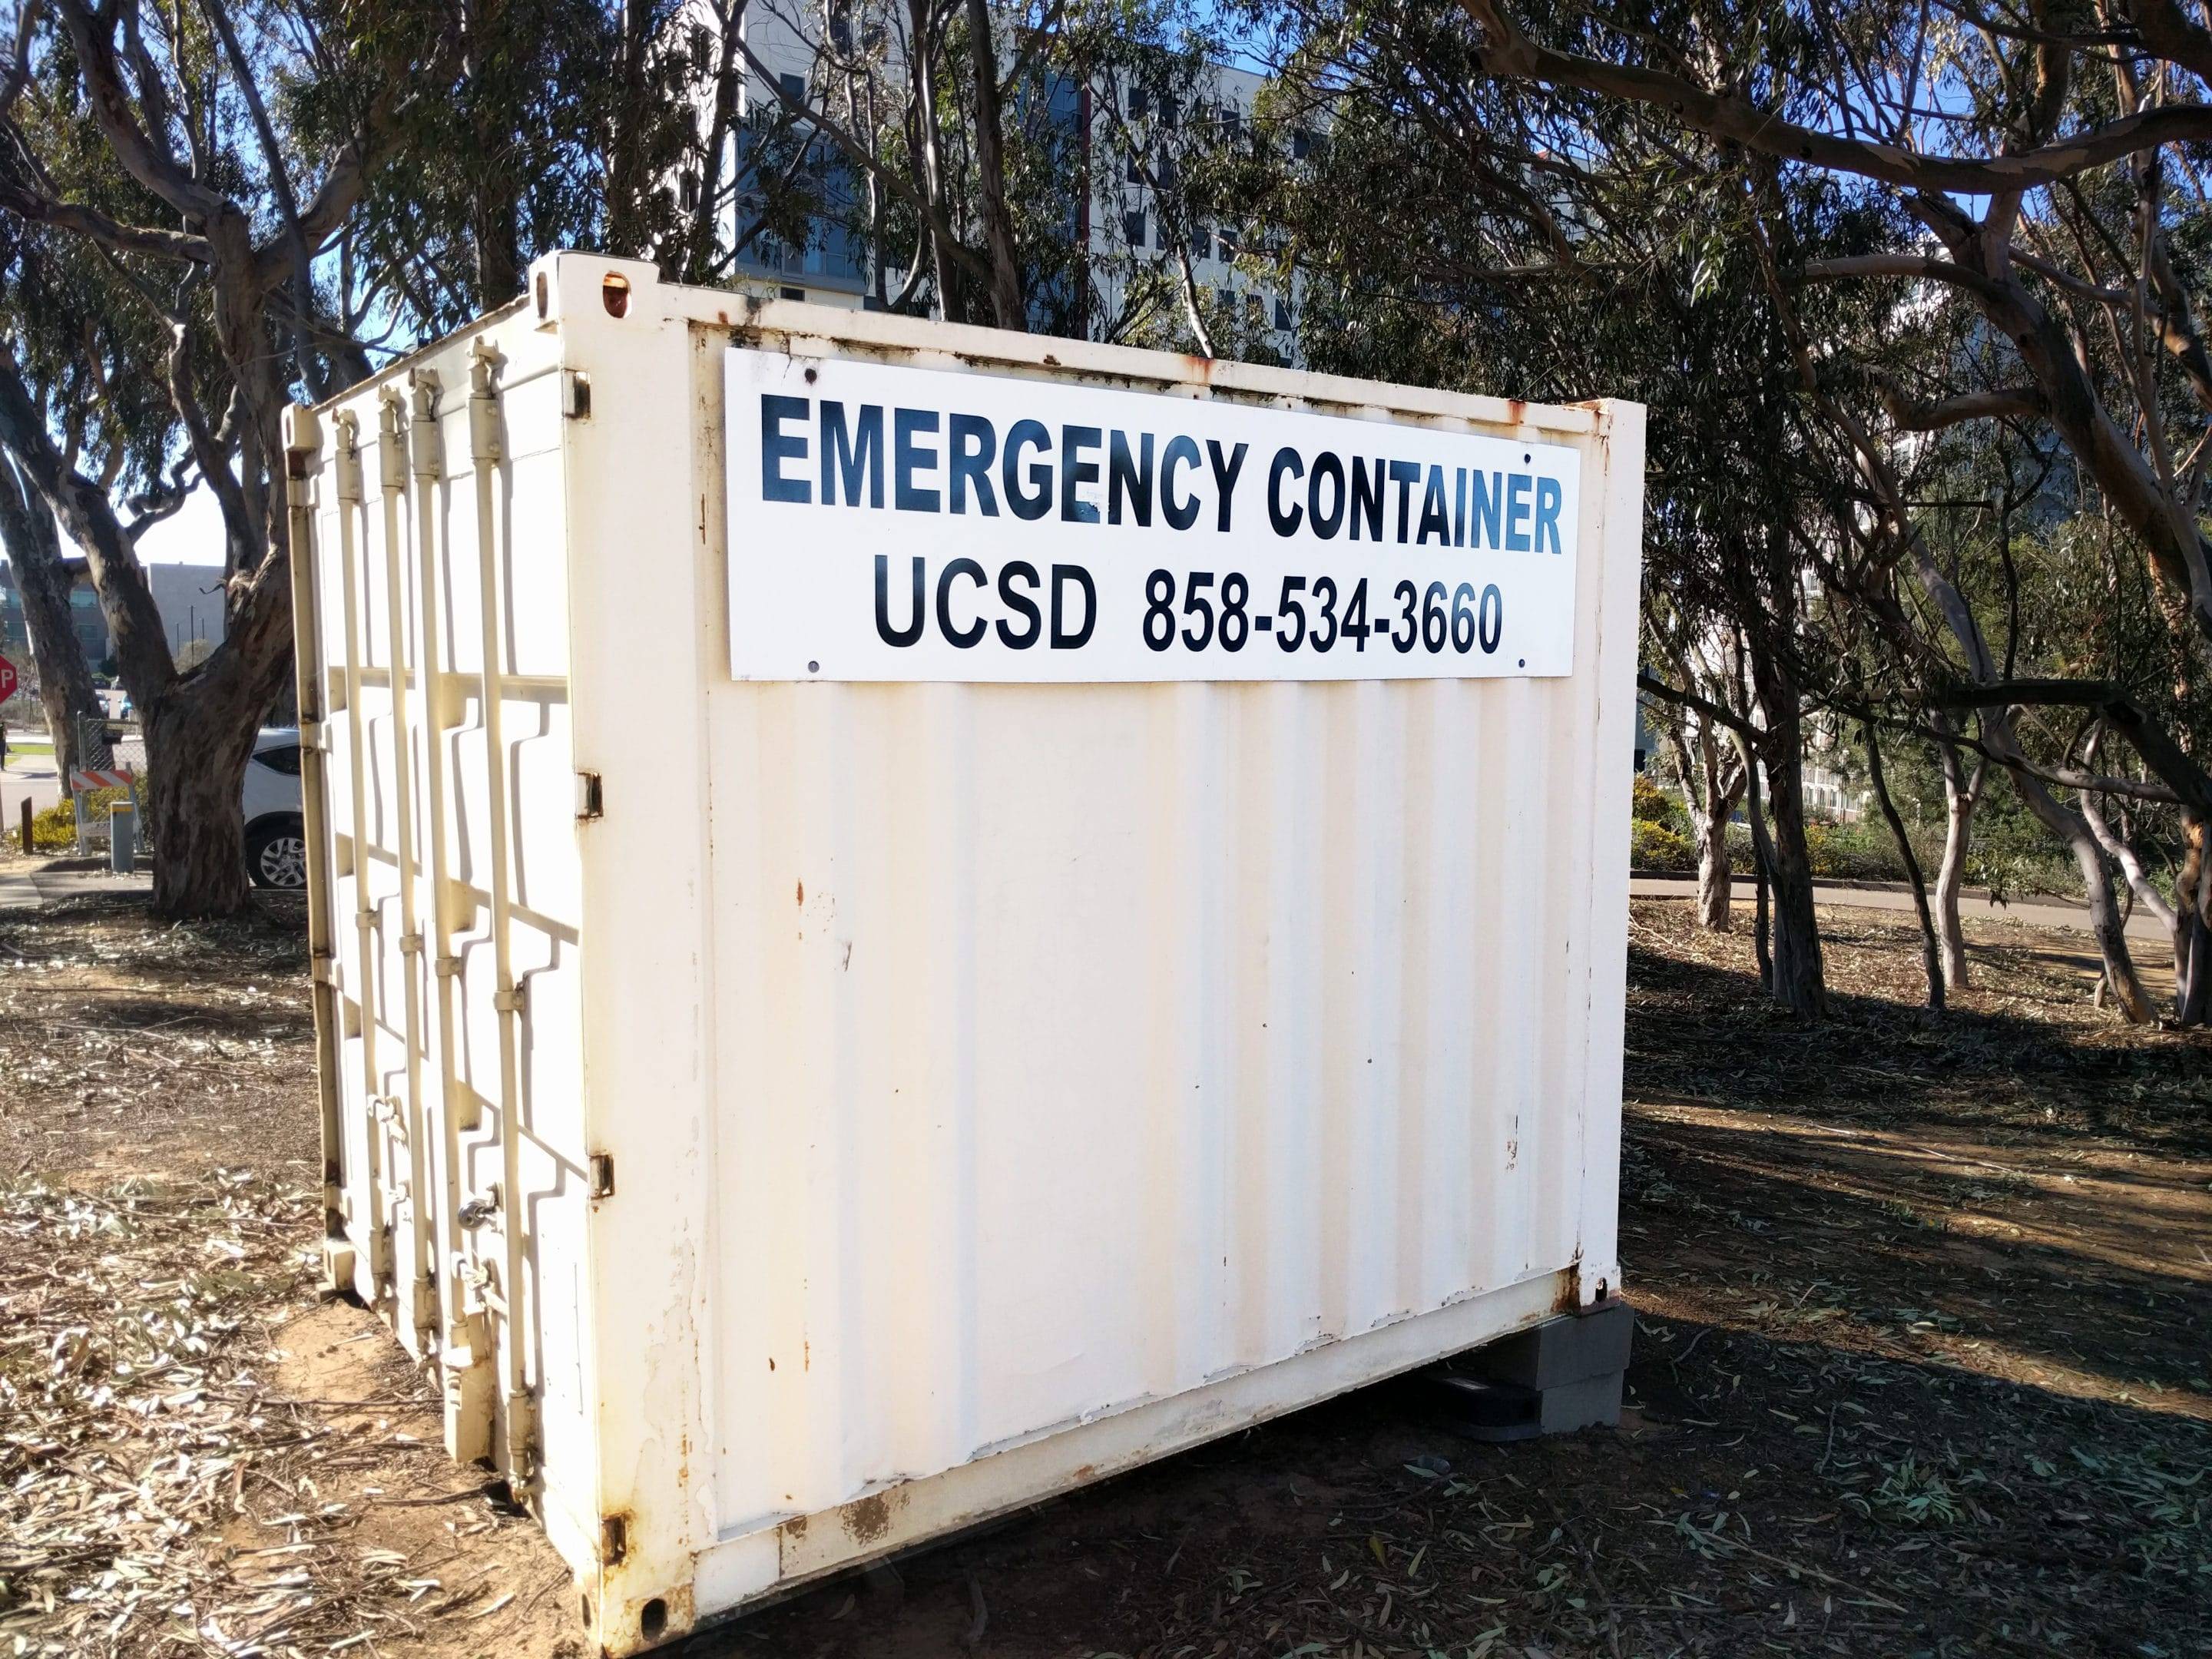 emergency container, UCSD